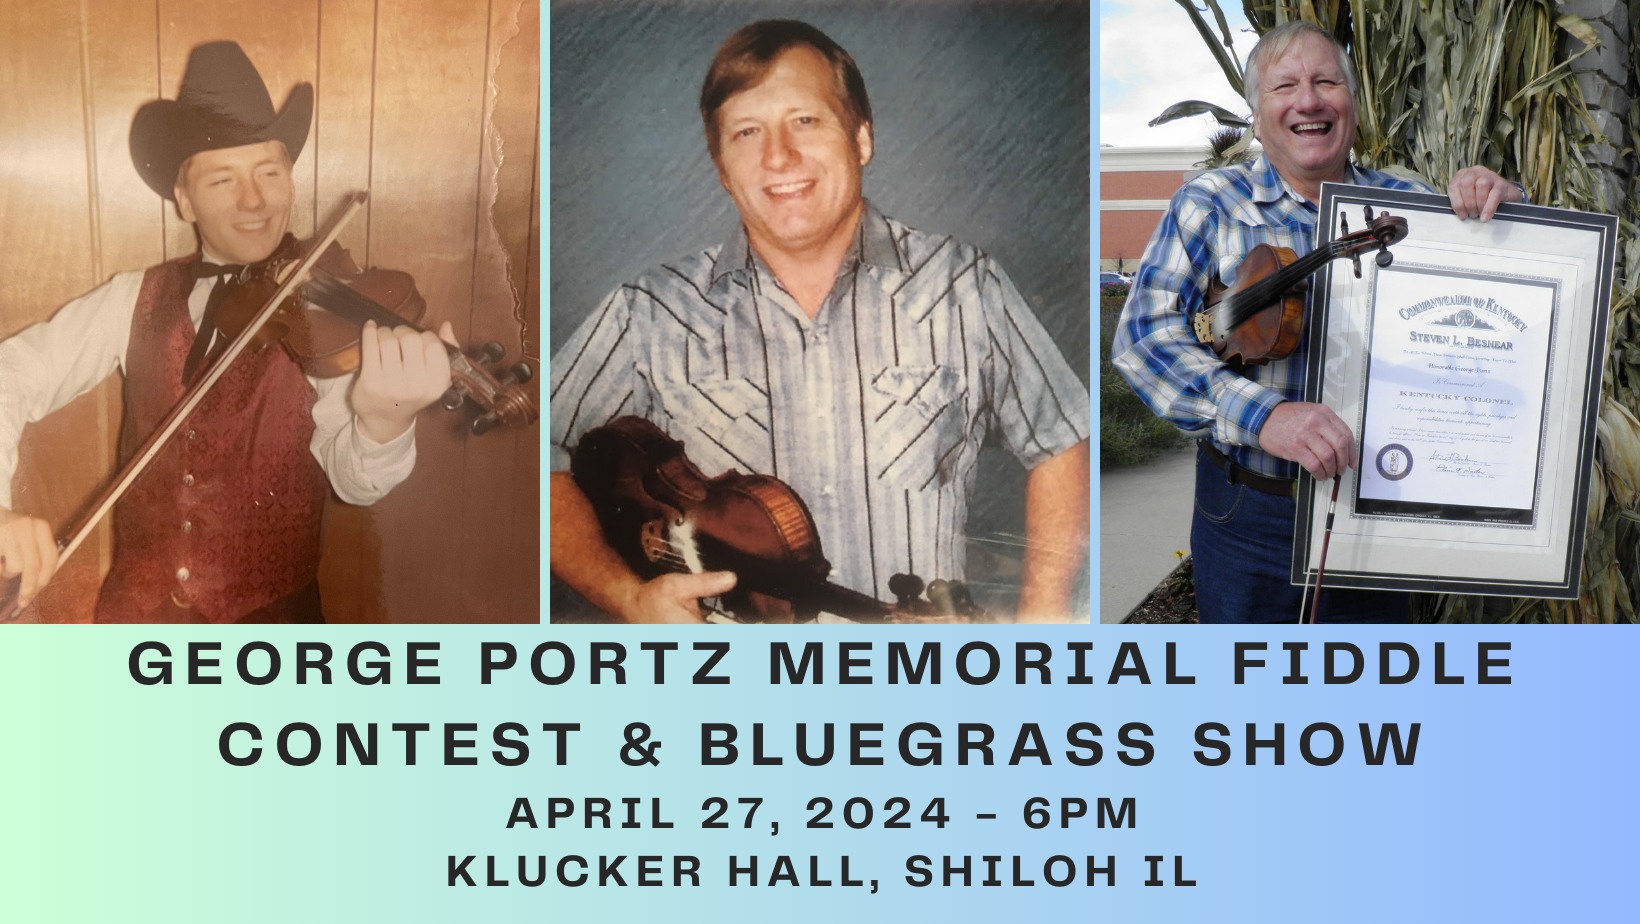 2nd Annual George Portz Memorial Fiddle Contest and Bluegrass Show